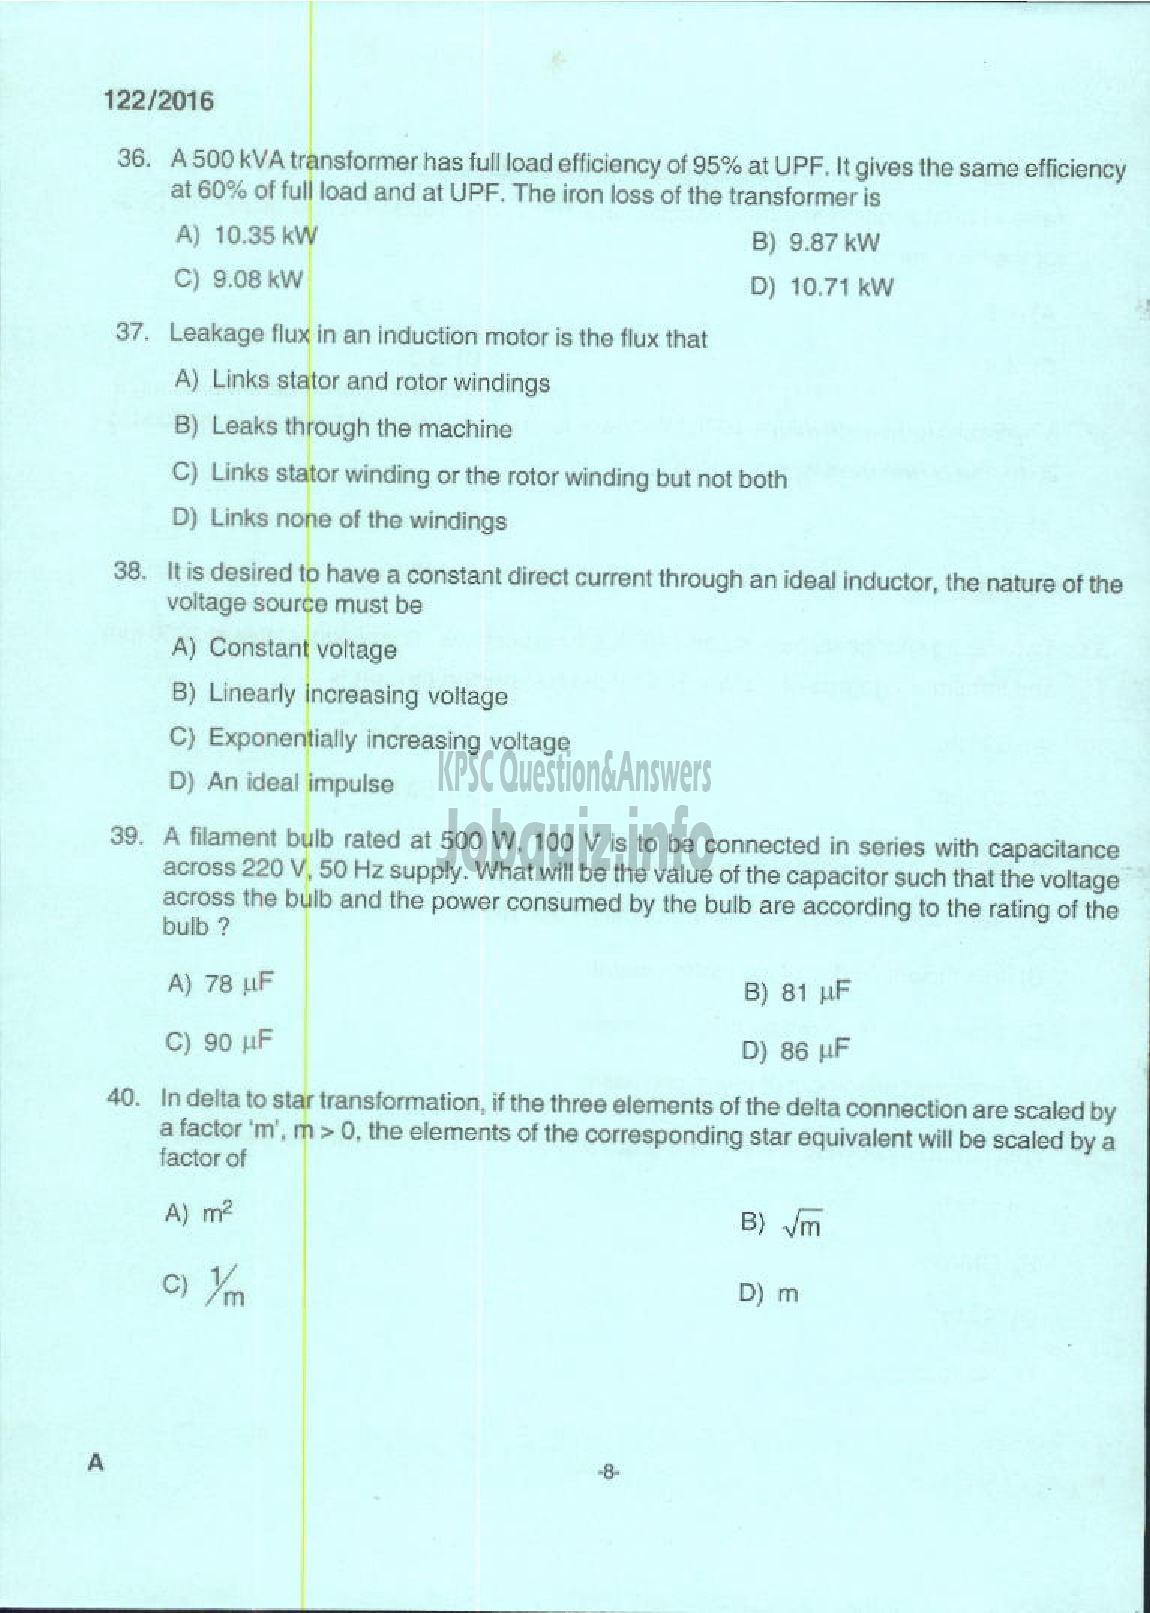 Kerala PSC Question Paper - ASSISTANT PROFESSOR MECHANICAL ENGINEERING TECHNICAL EDUCATION ENGINEERING DCOLLEGES-6